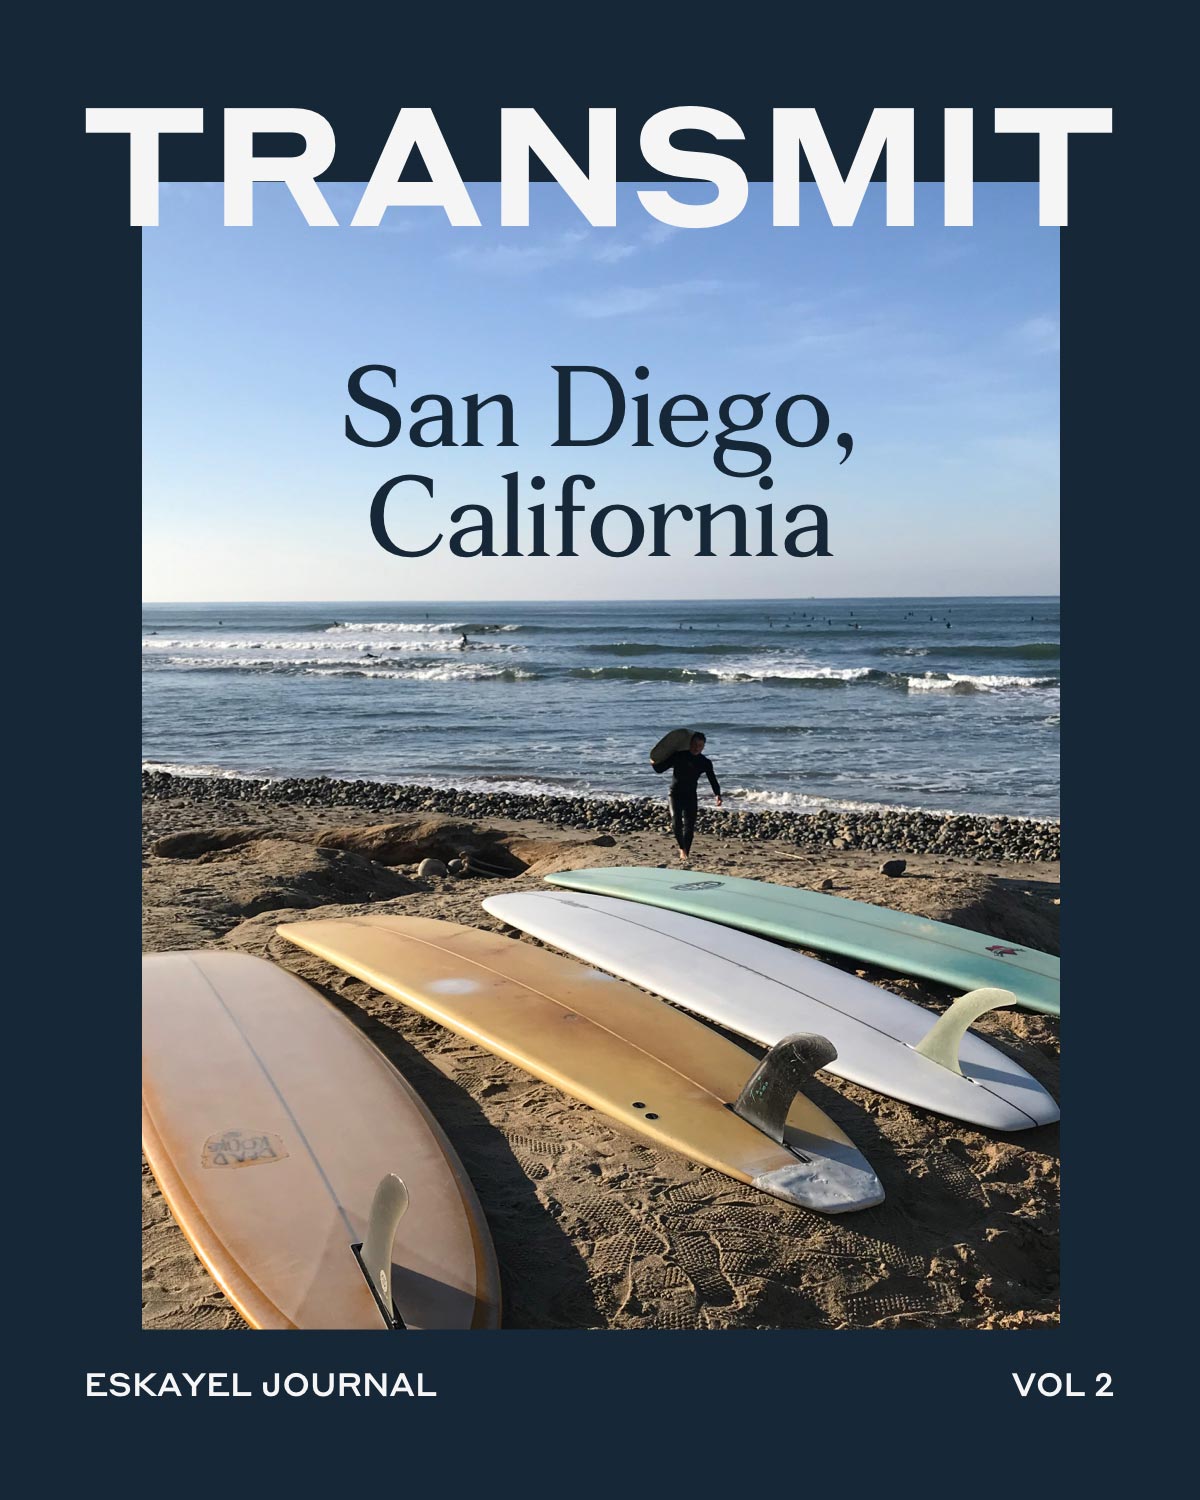 The cover of Transmist in San Diego, California